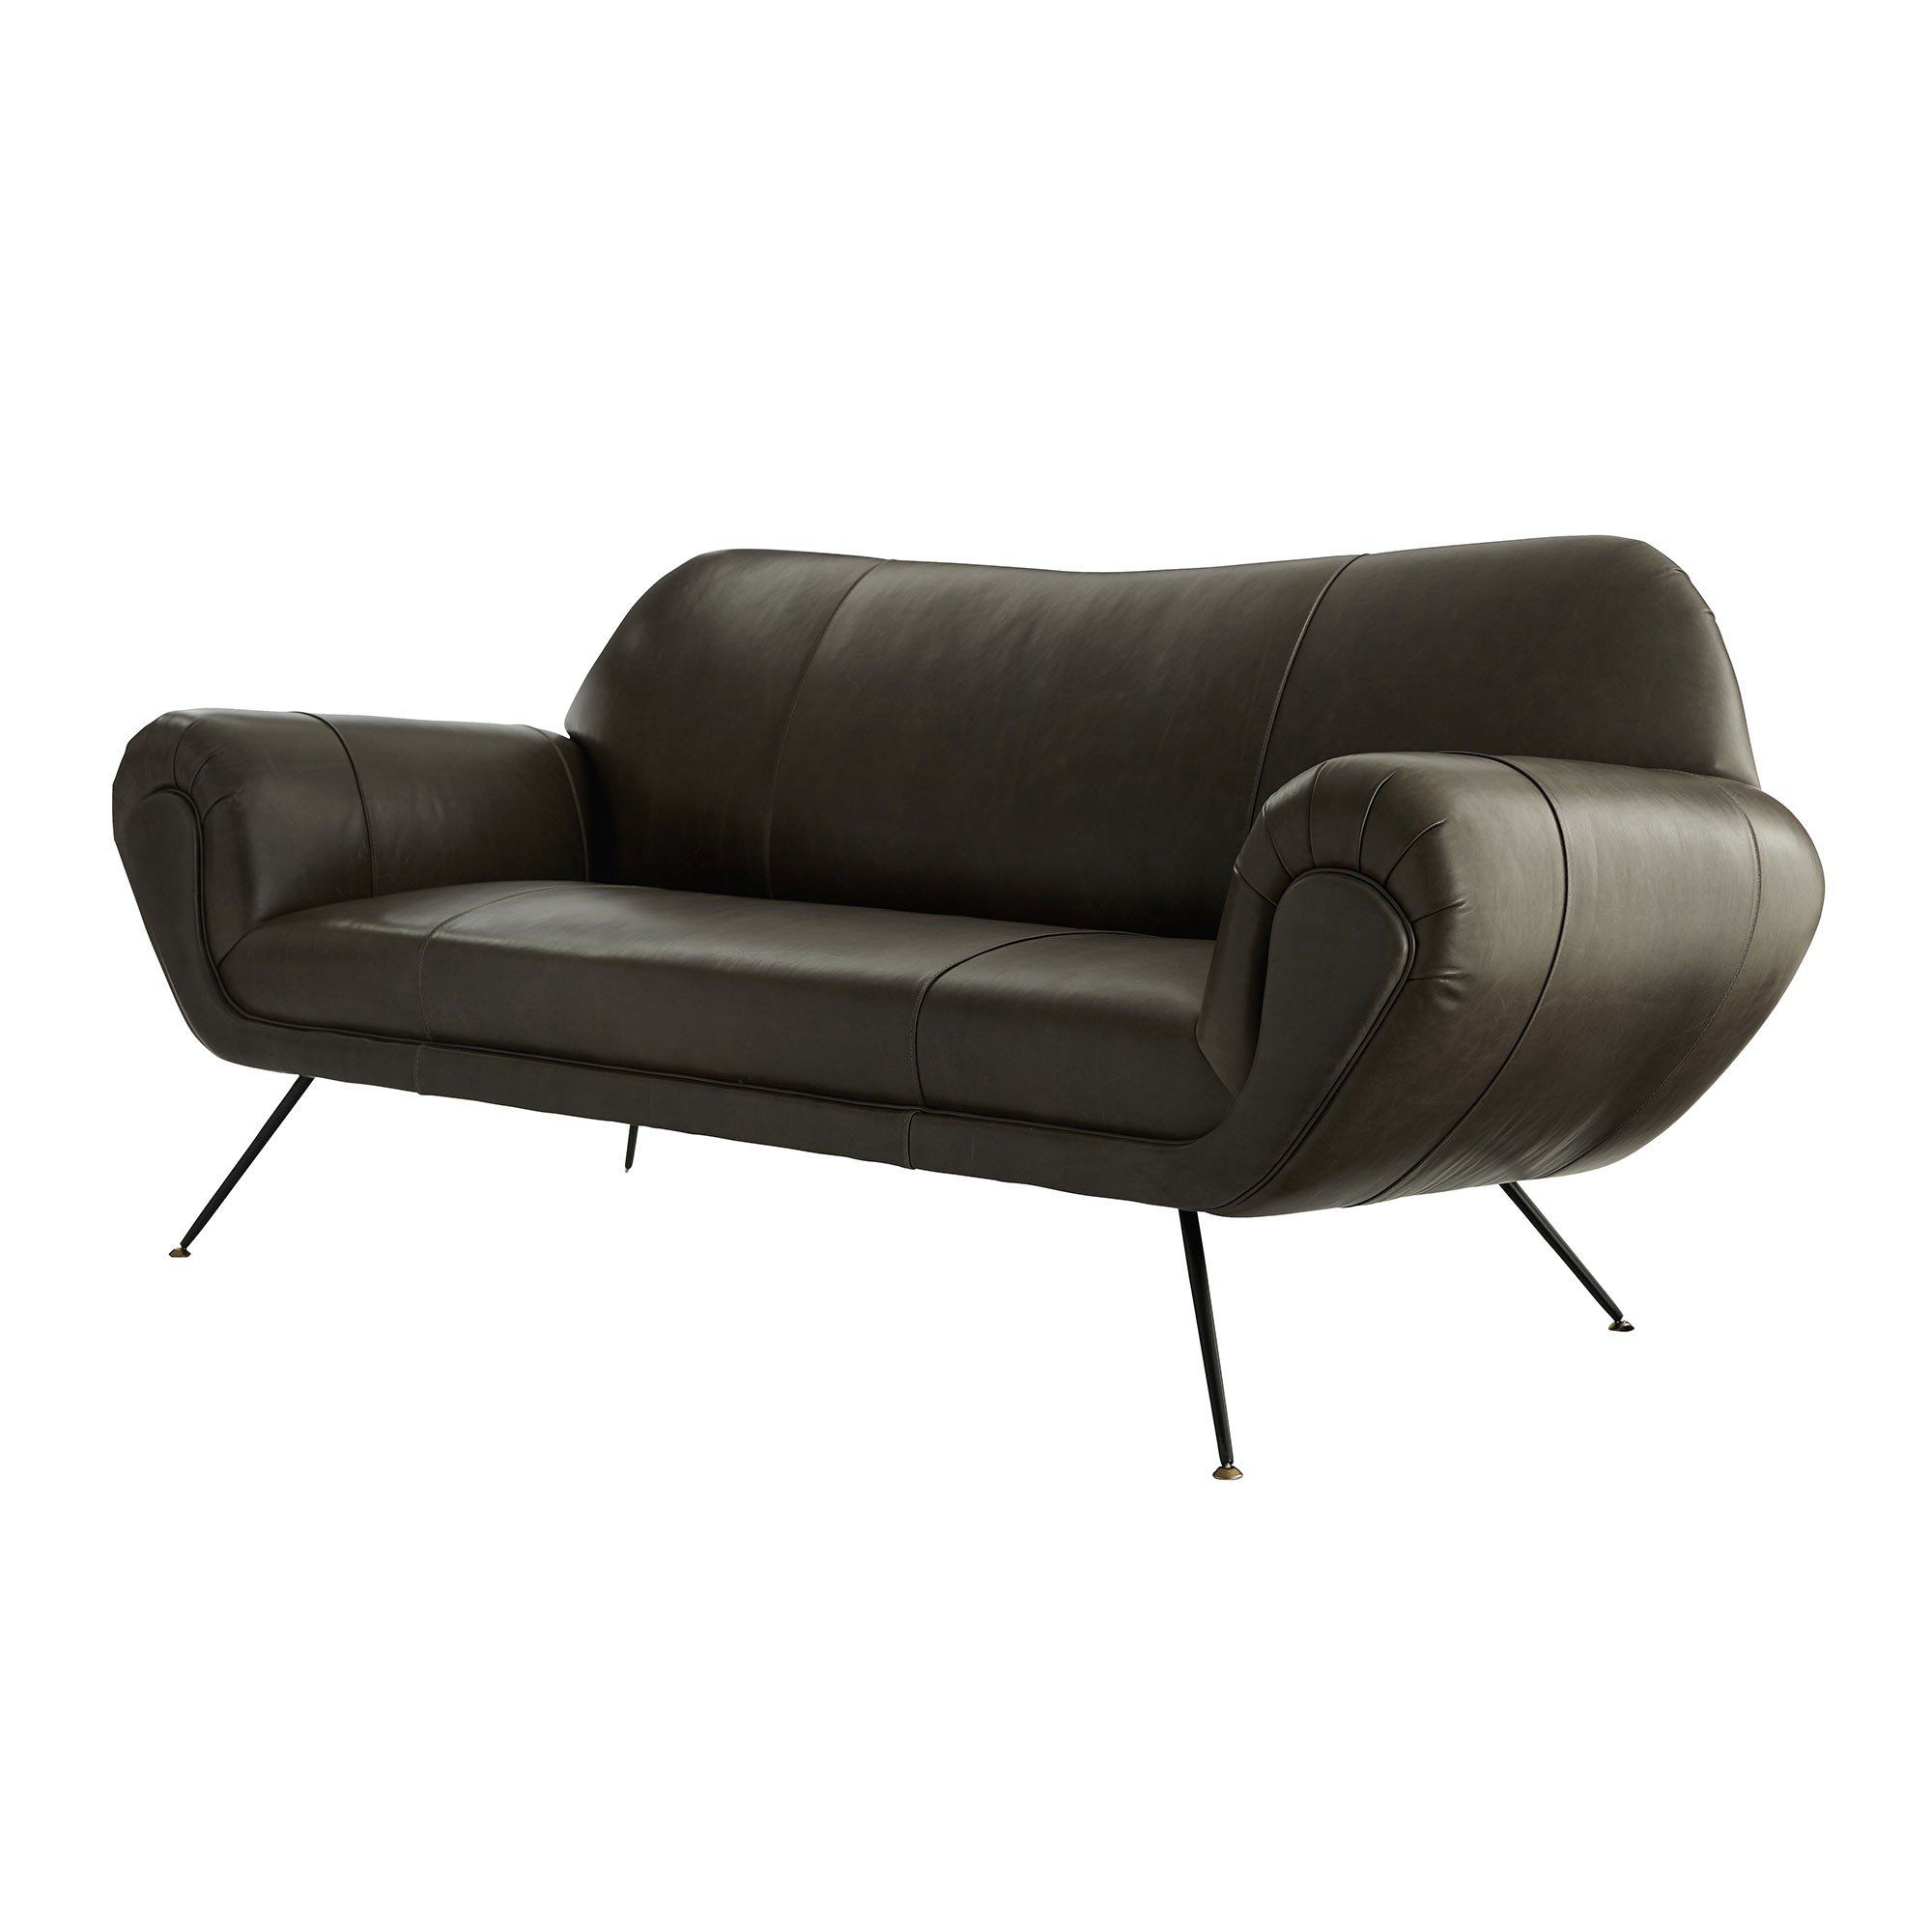 Arteriors Mitchell Leather Sofa | Wayfair Inside Mitchell Arm Sofa Chairs (View 7 of 25)